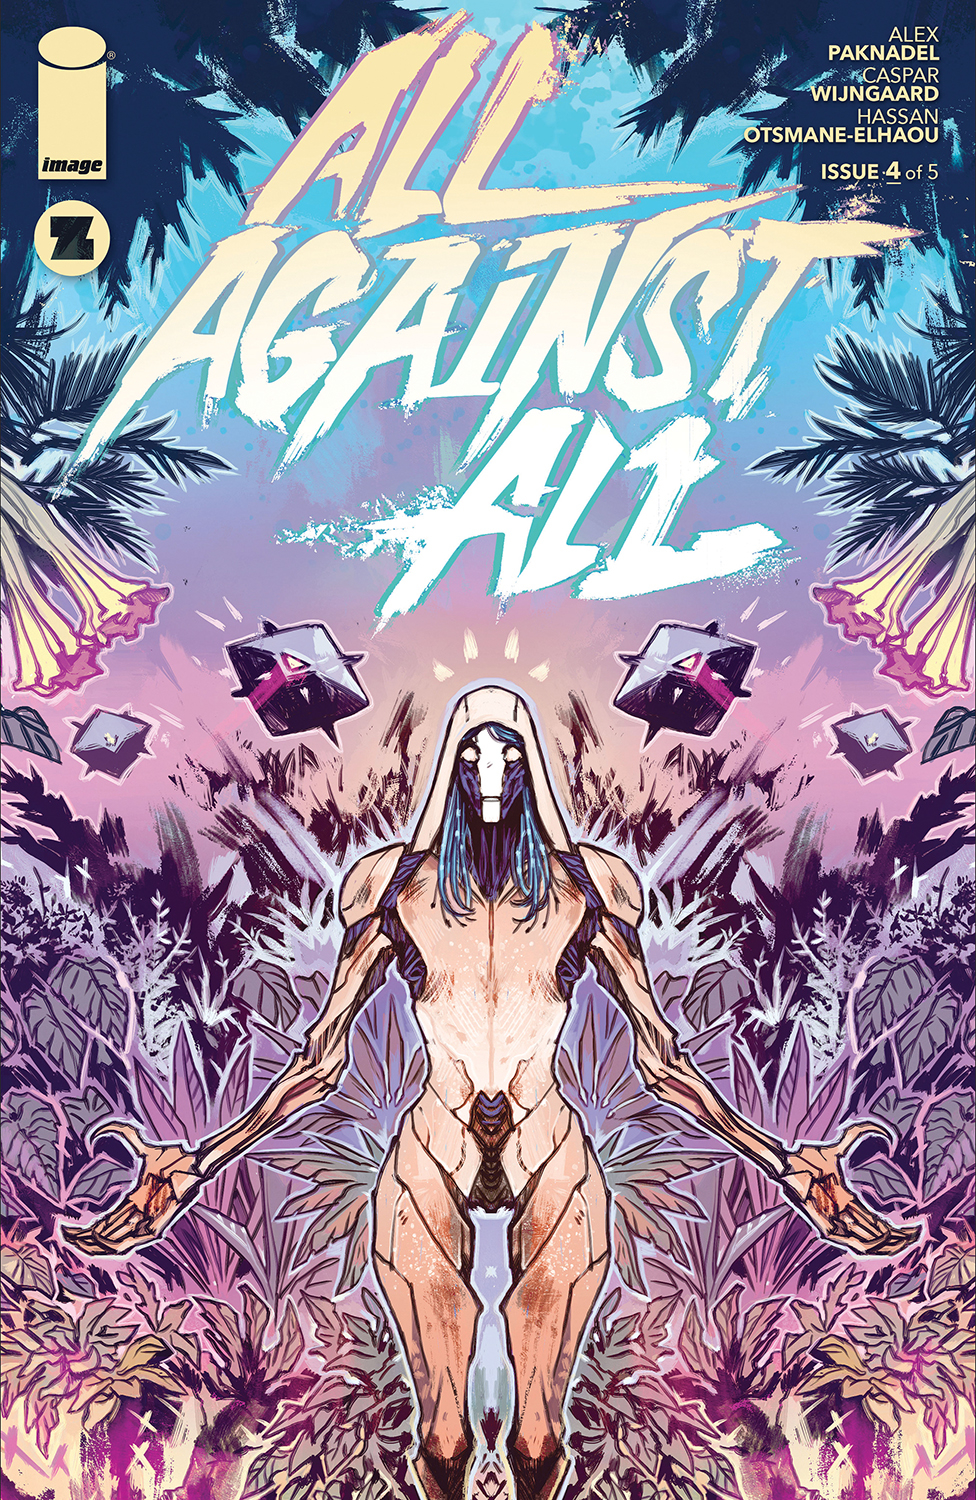 All Against All #4 Cover A Wijngaard (Mature) (Of 5)